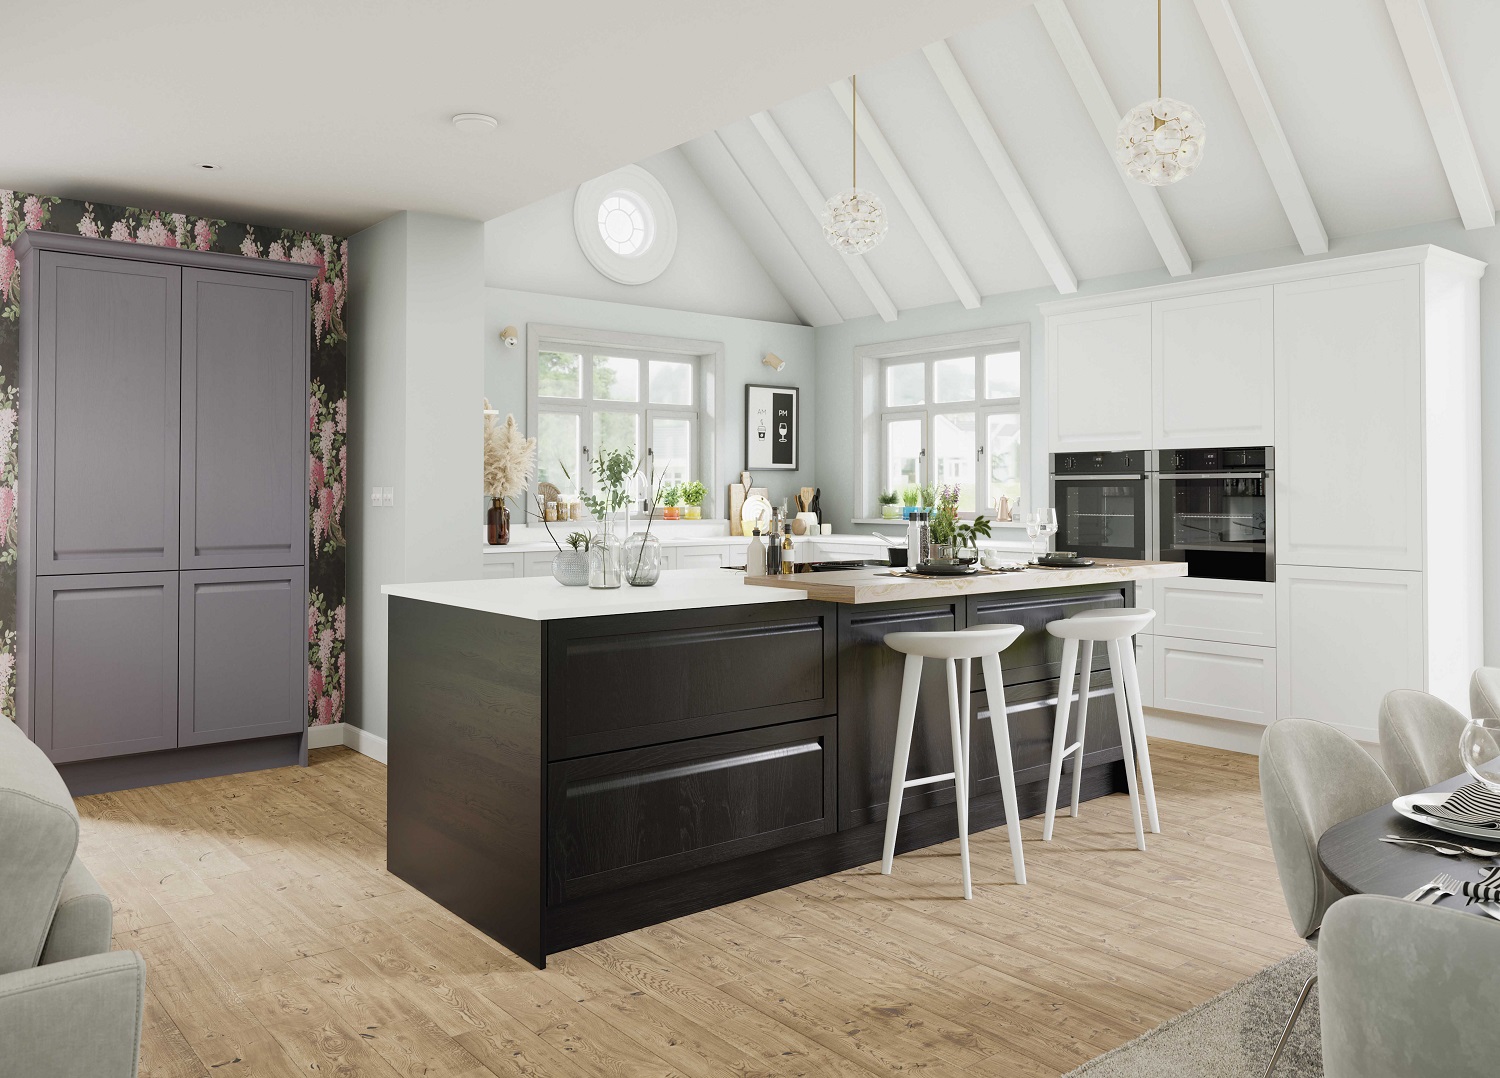 Faversham Kitchen -LochAnna Kitchens, is introducing the showstopping Faversham collection. The seamless design of this handleless kitchen perfectly marries traditional and modern themes to achieve a timeless finish.